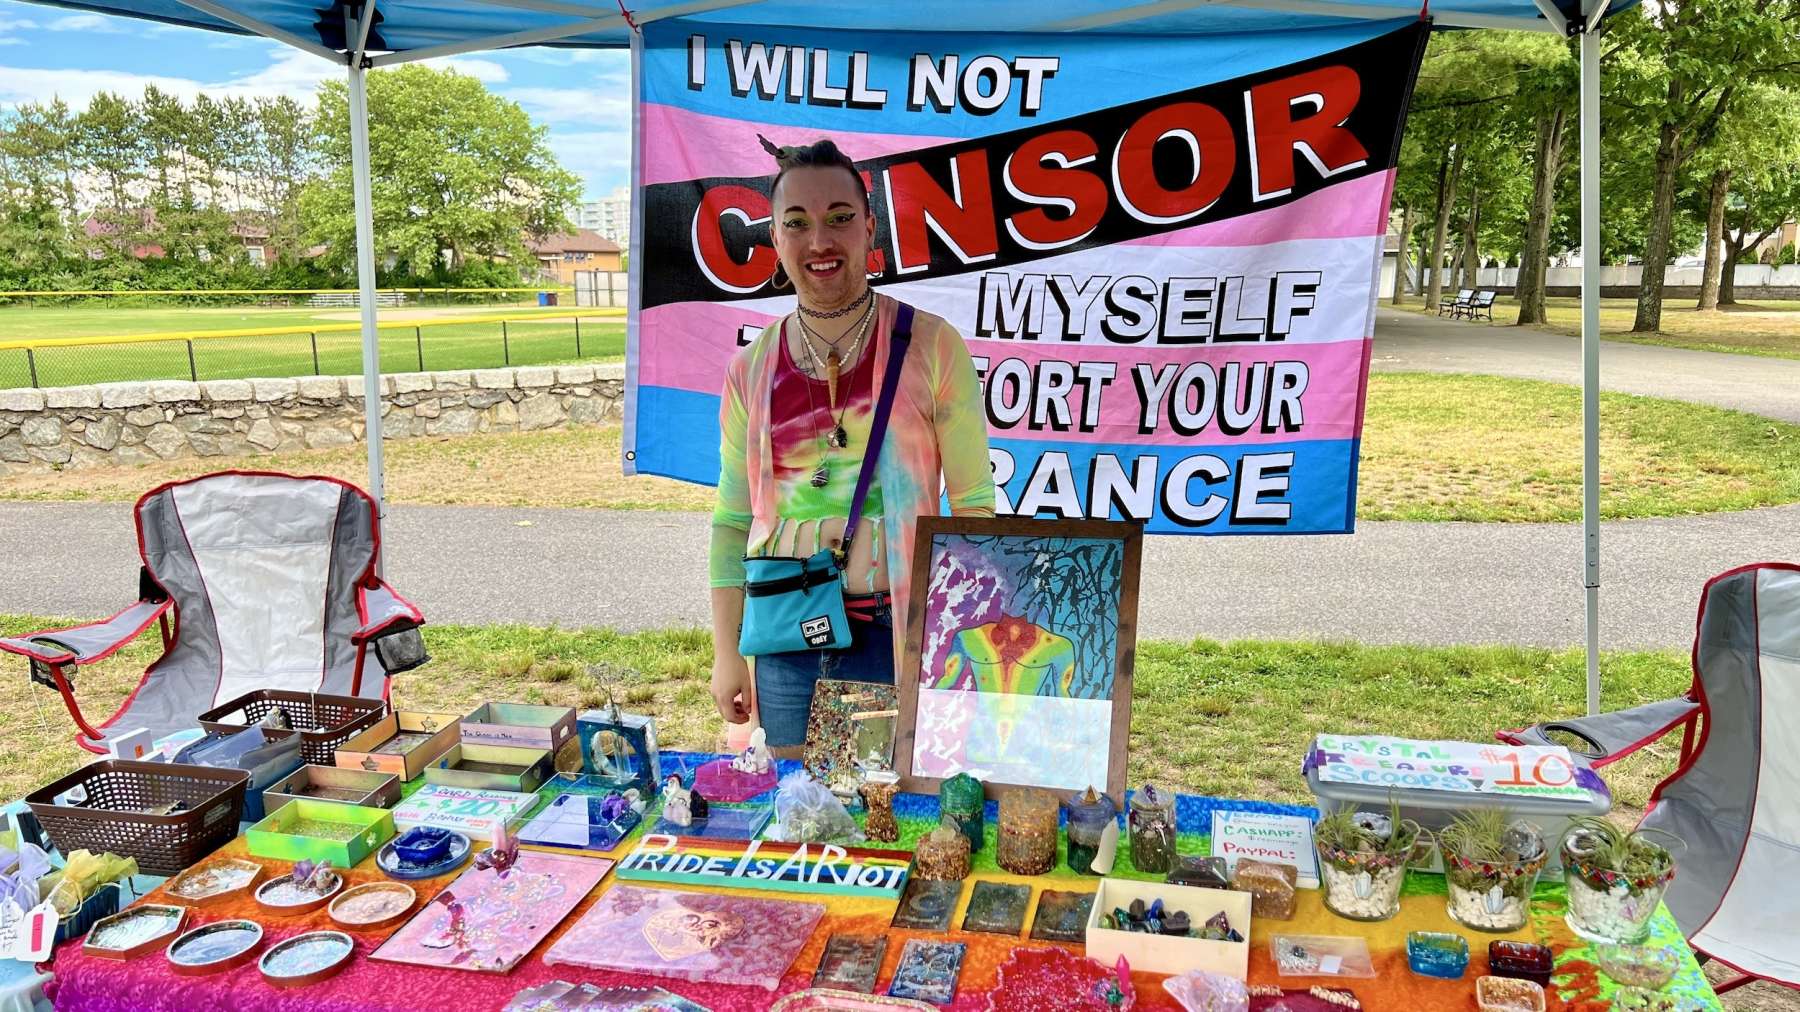 Rhode Island News: Woonsocket Pride 2022 an occasion for joy and resilience